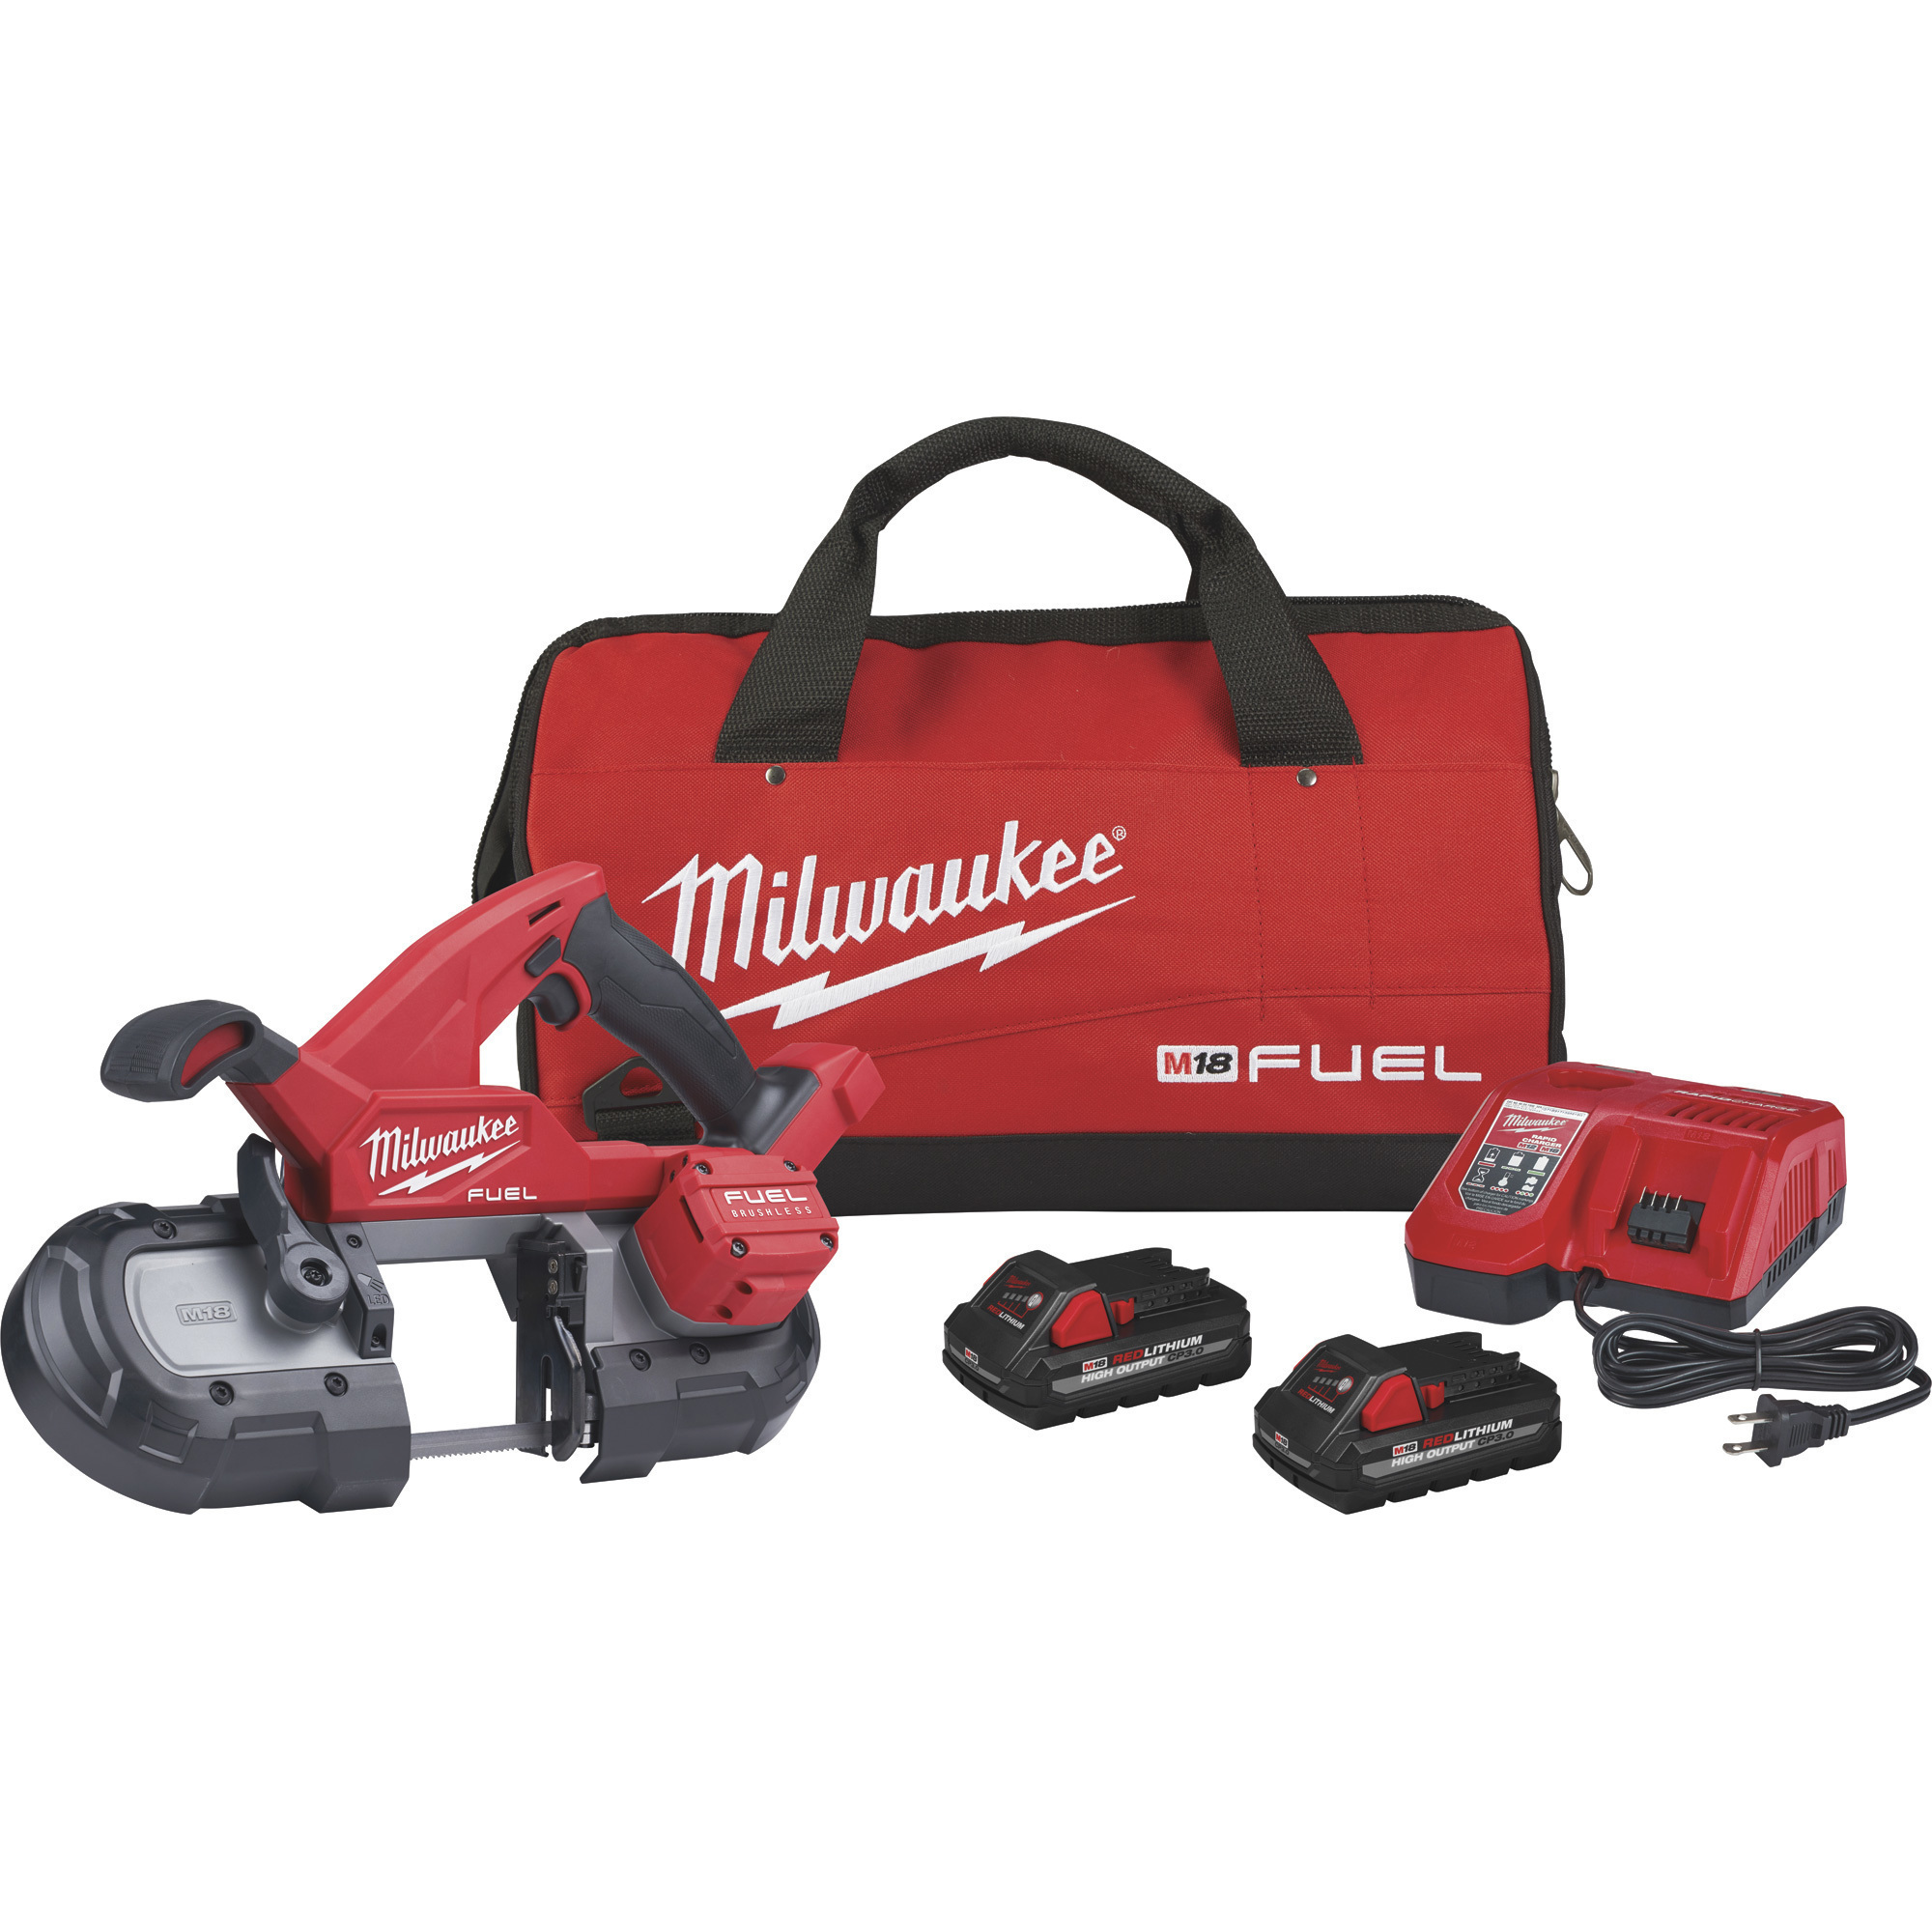 Milwaukee M18 FUEL Compact Cordless Band Saw Kit, Two Batteries, Model 2829-22